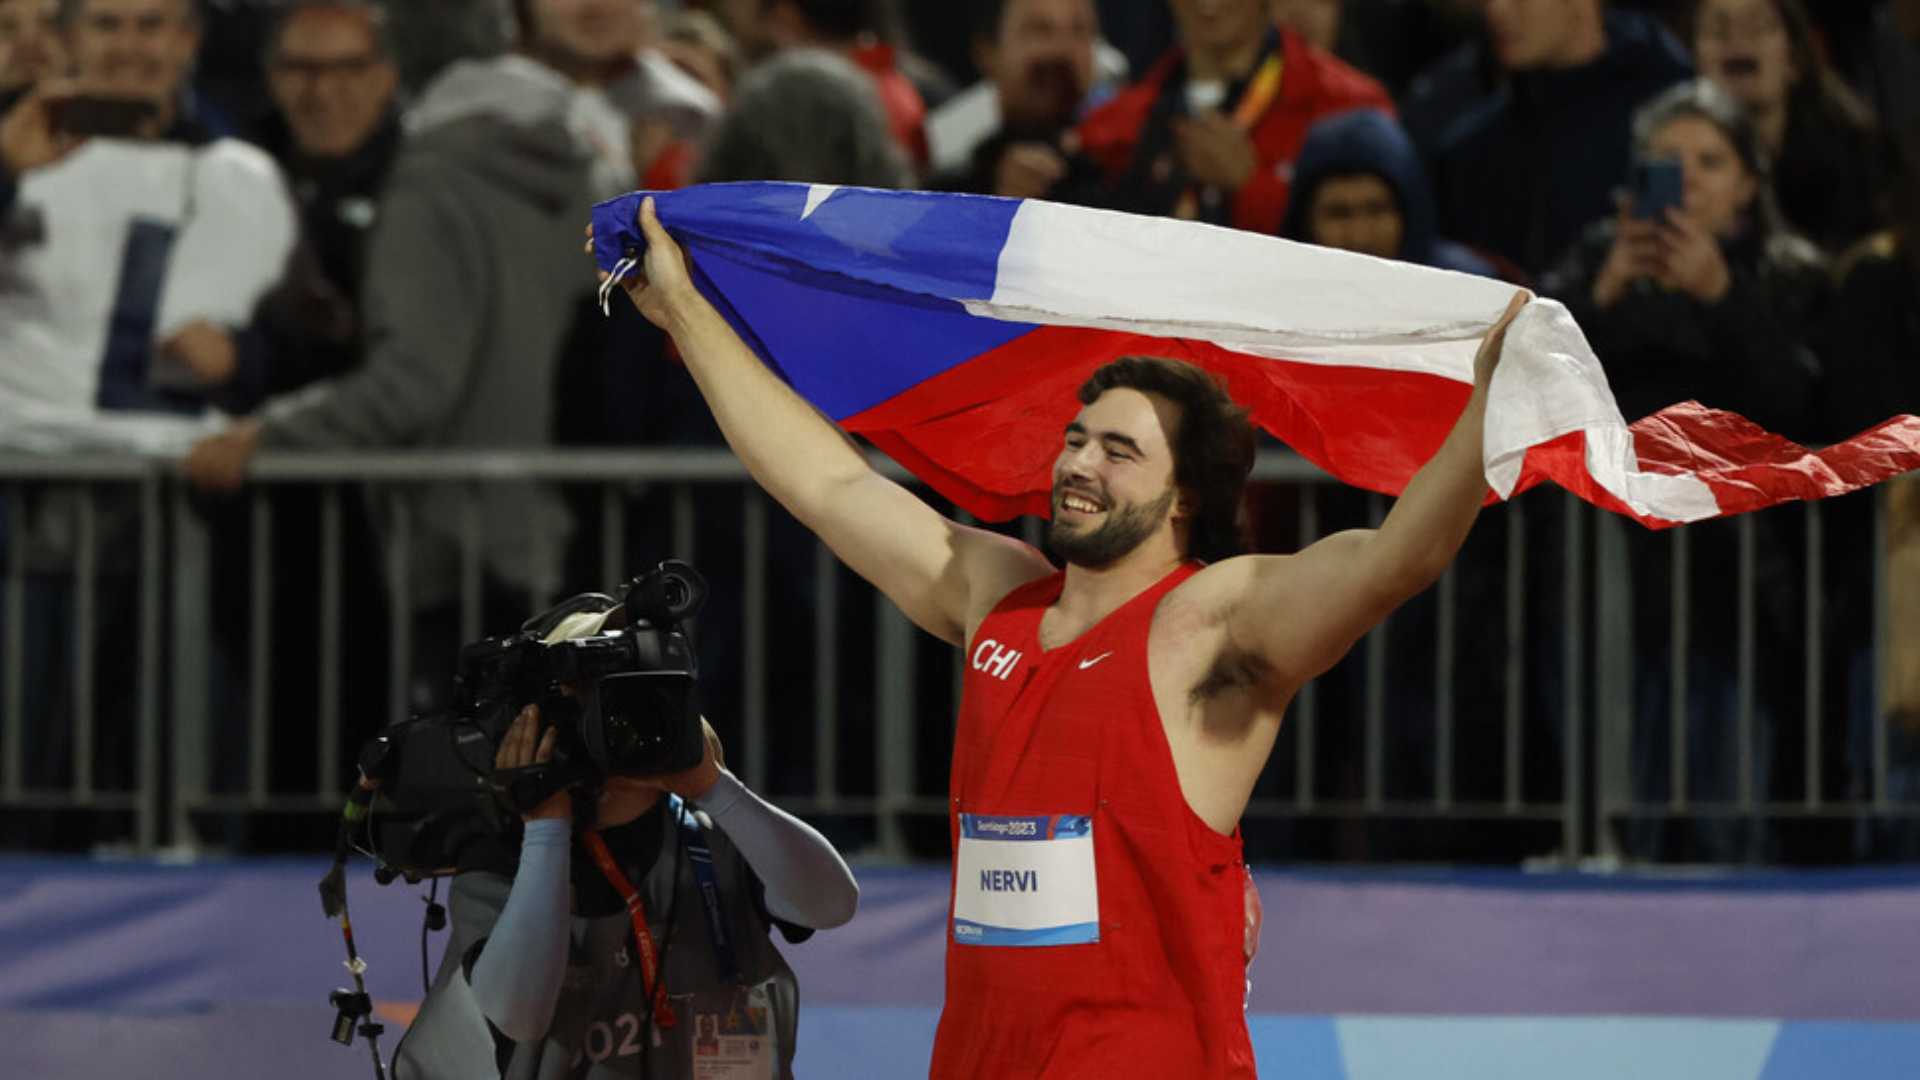 Lucas Nervi secures Chile's first gold in athletics